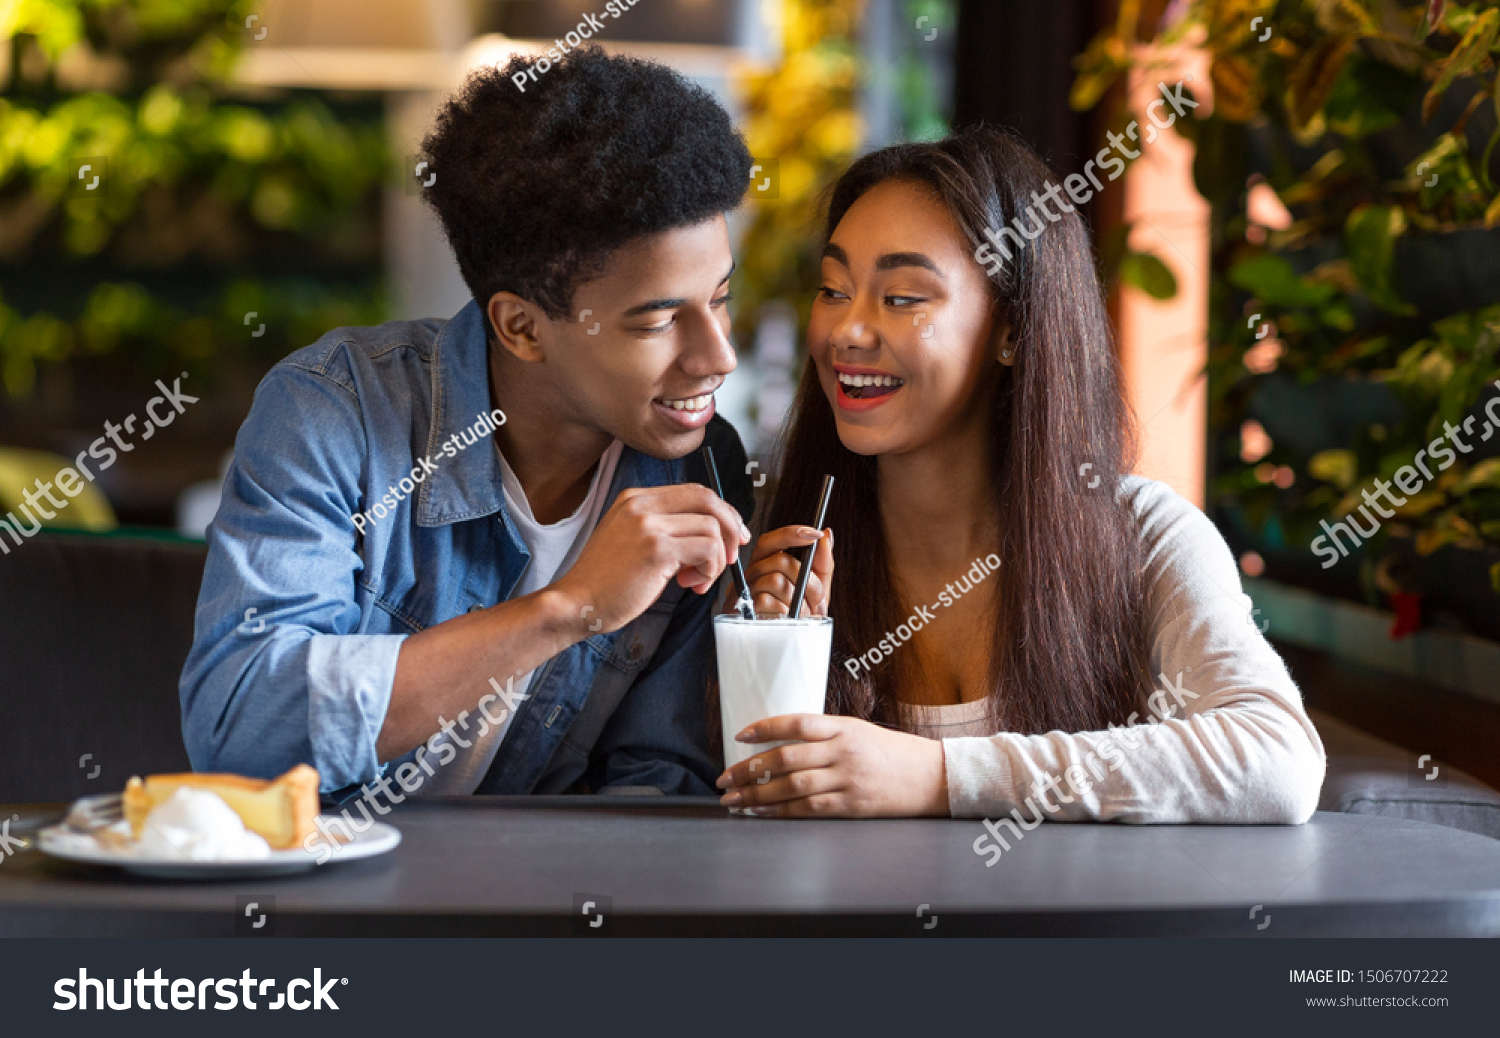 4,340 African american couple restaurant Images, Stock Photos & Vectors ...